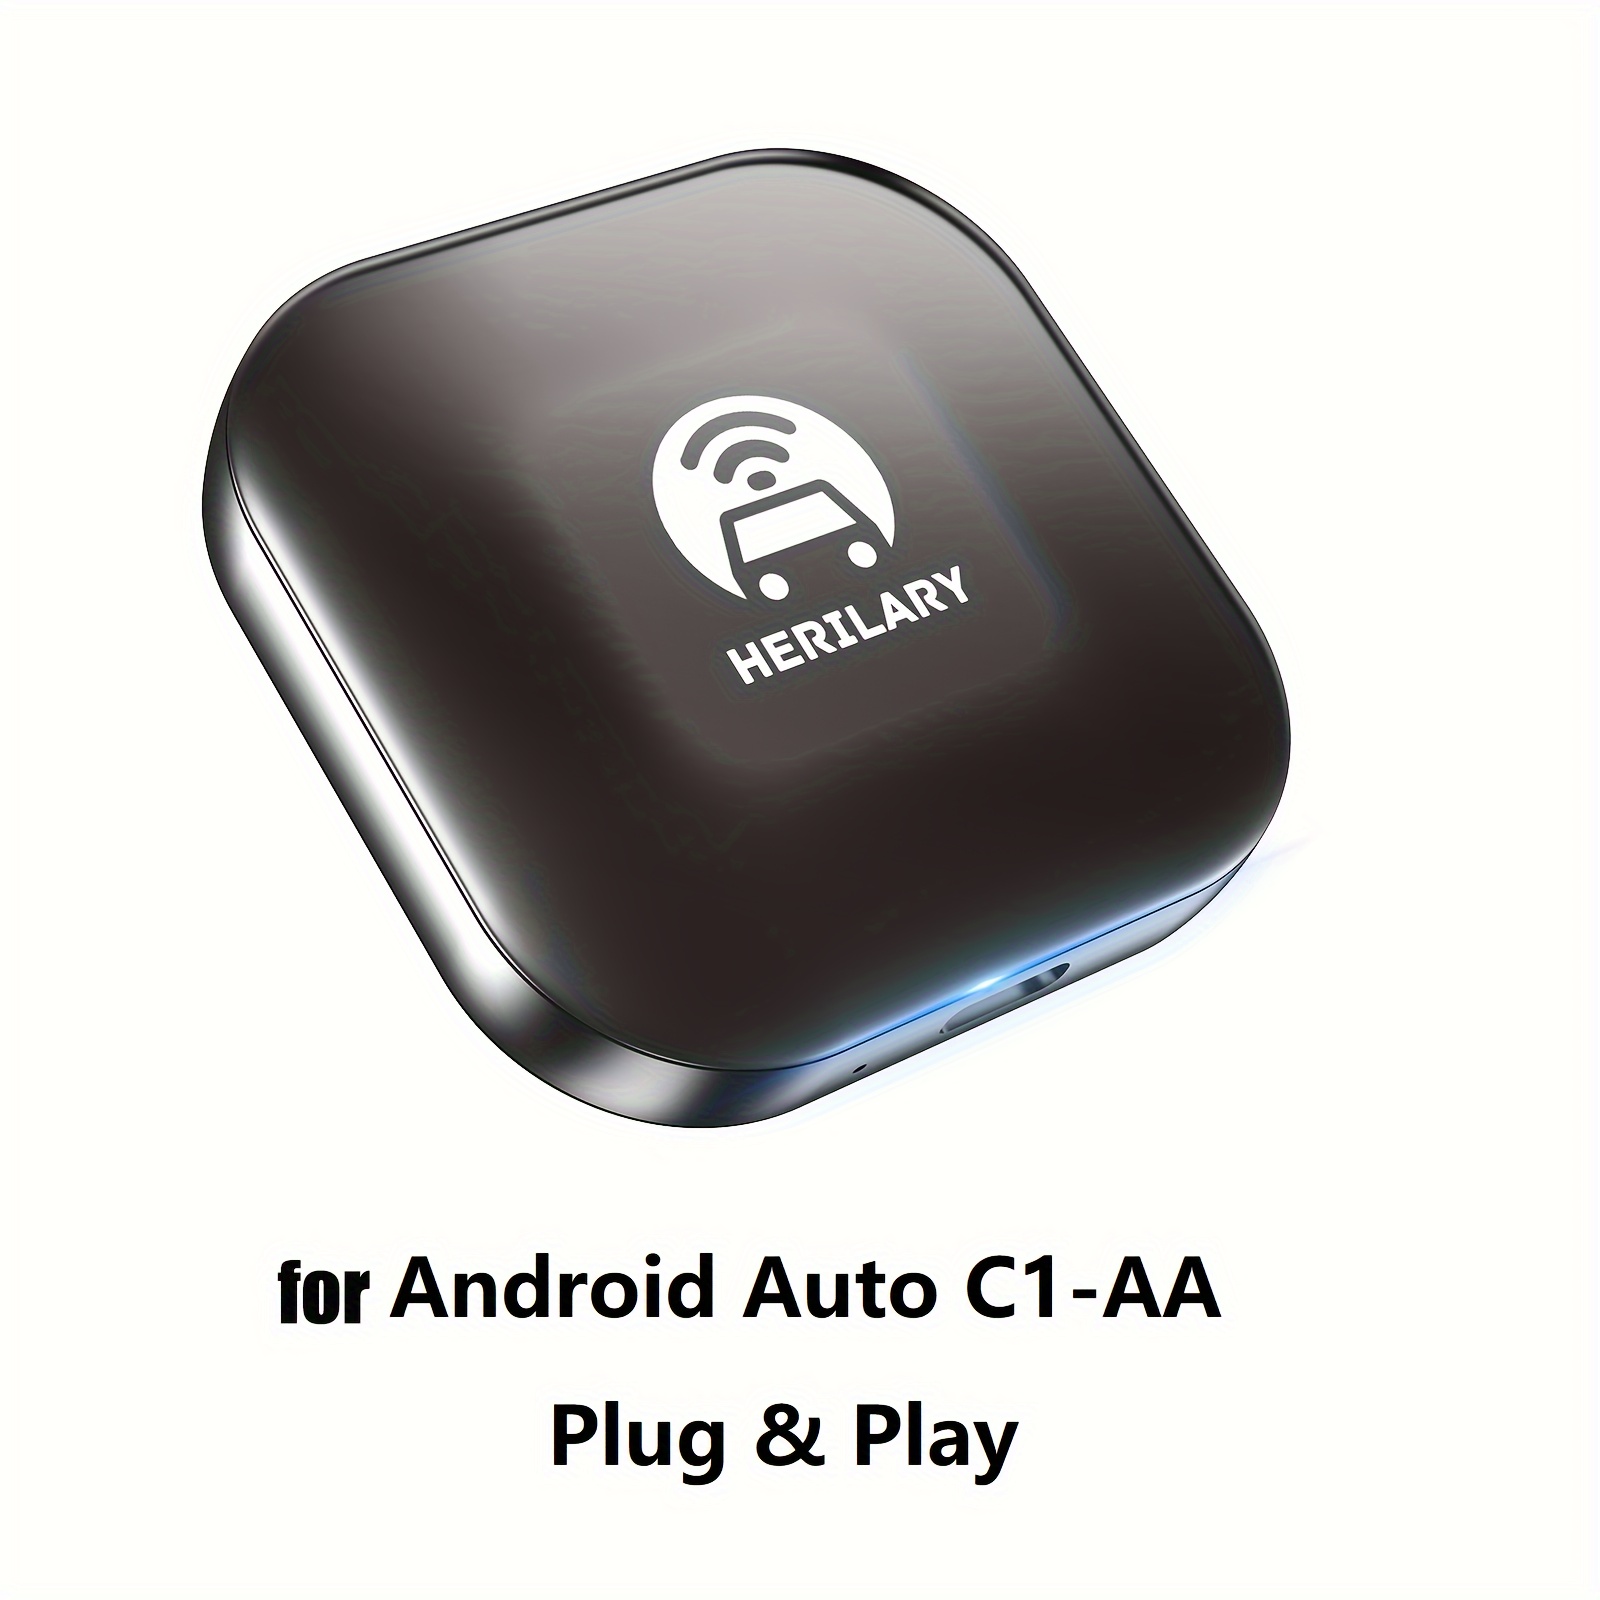 Wireless Android Auto Adapter, Android Auto Wireless Dongle